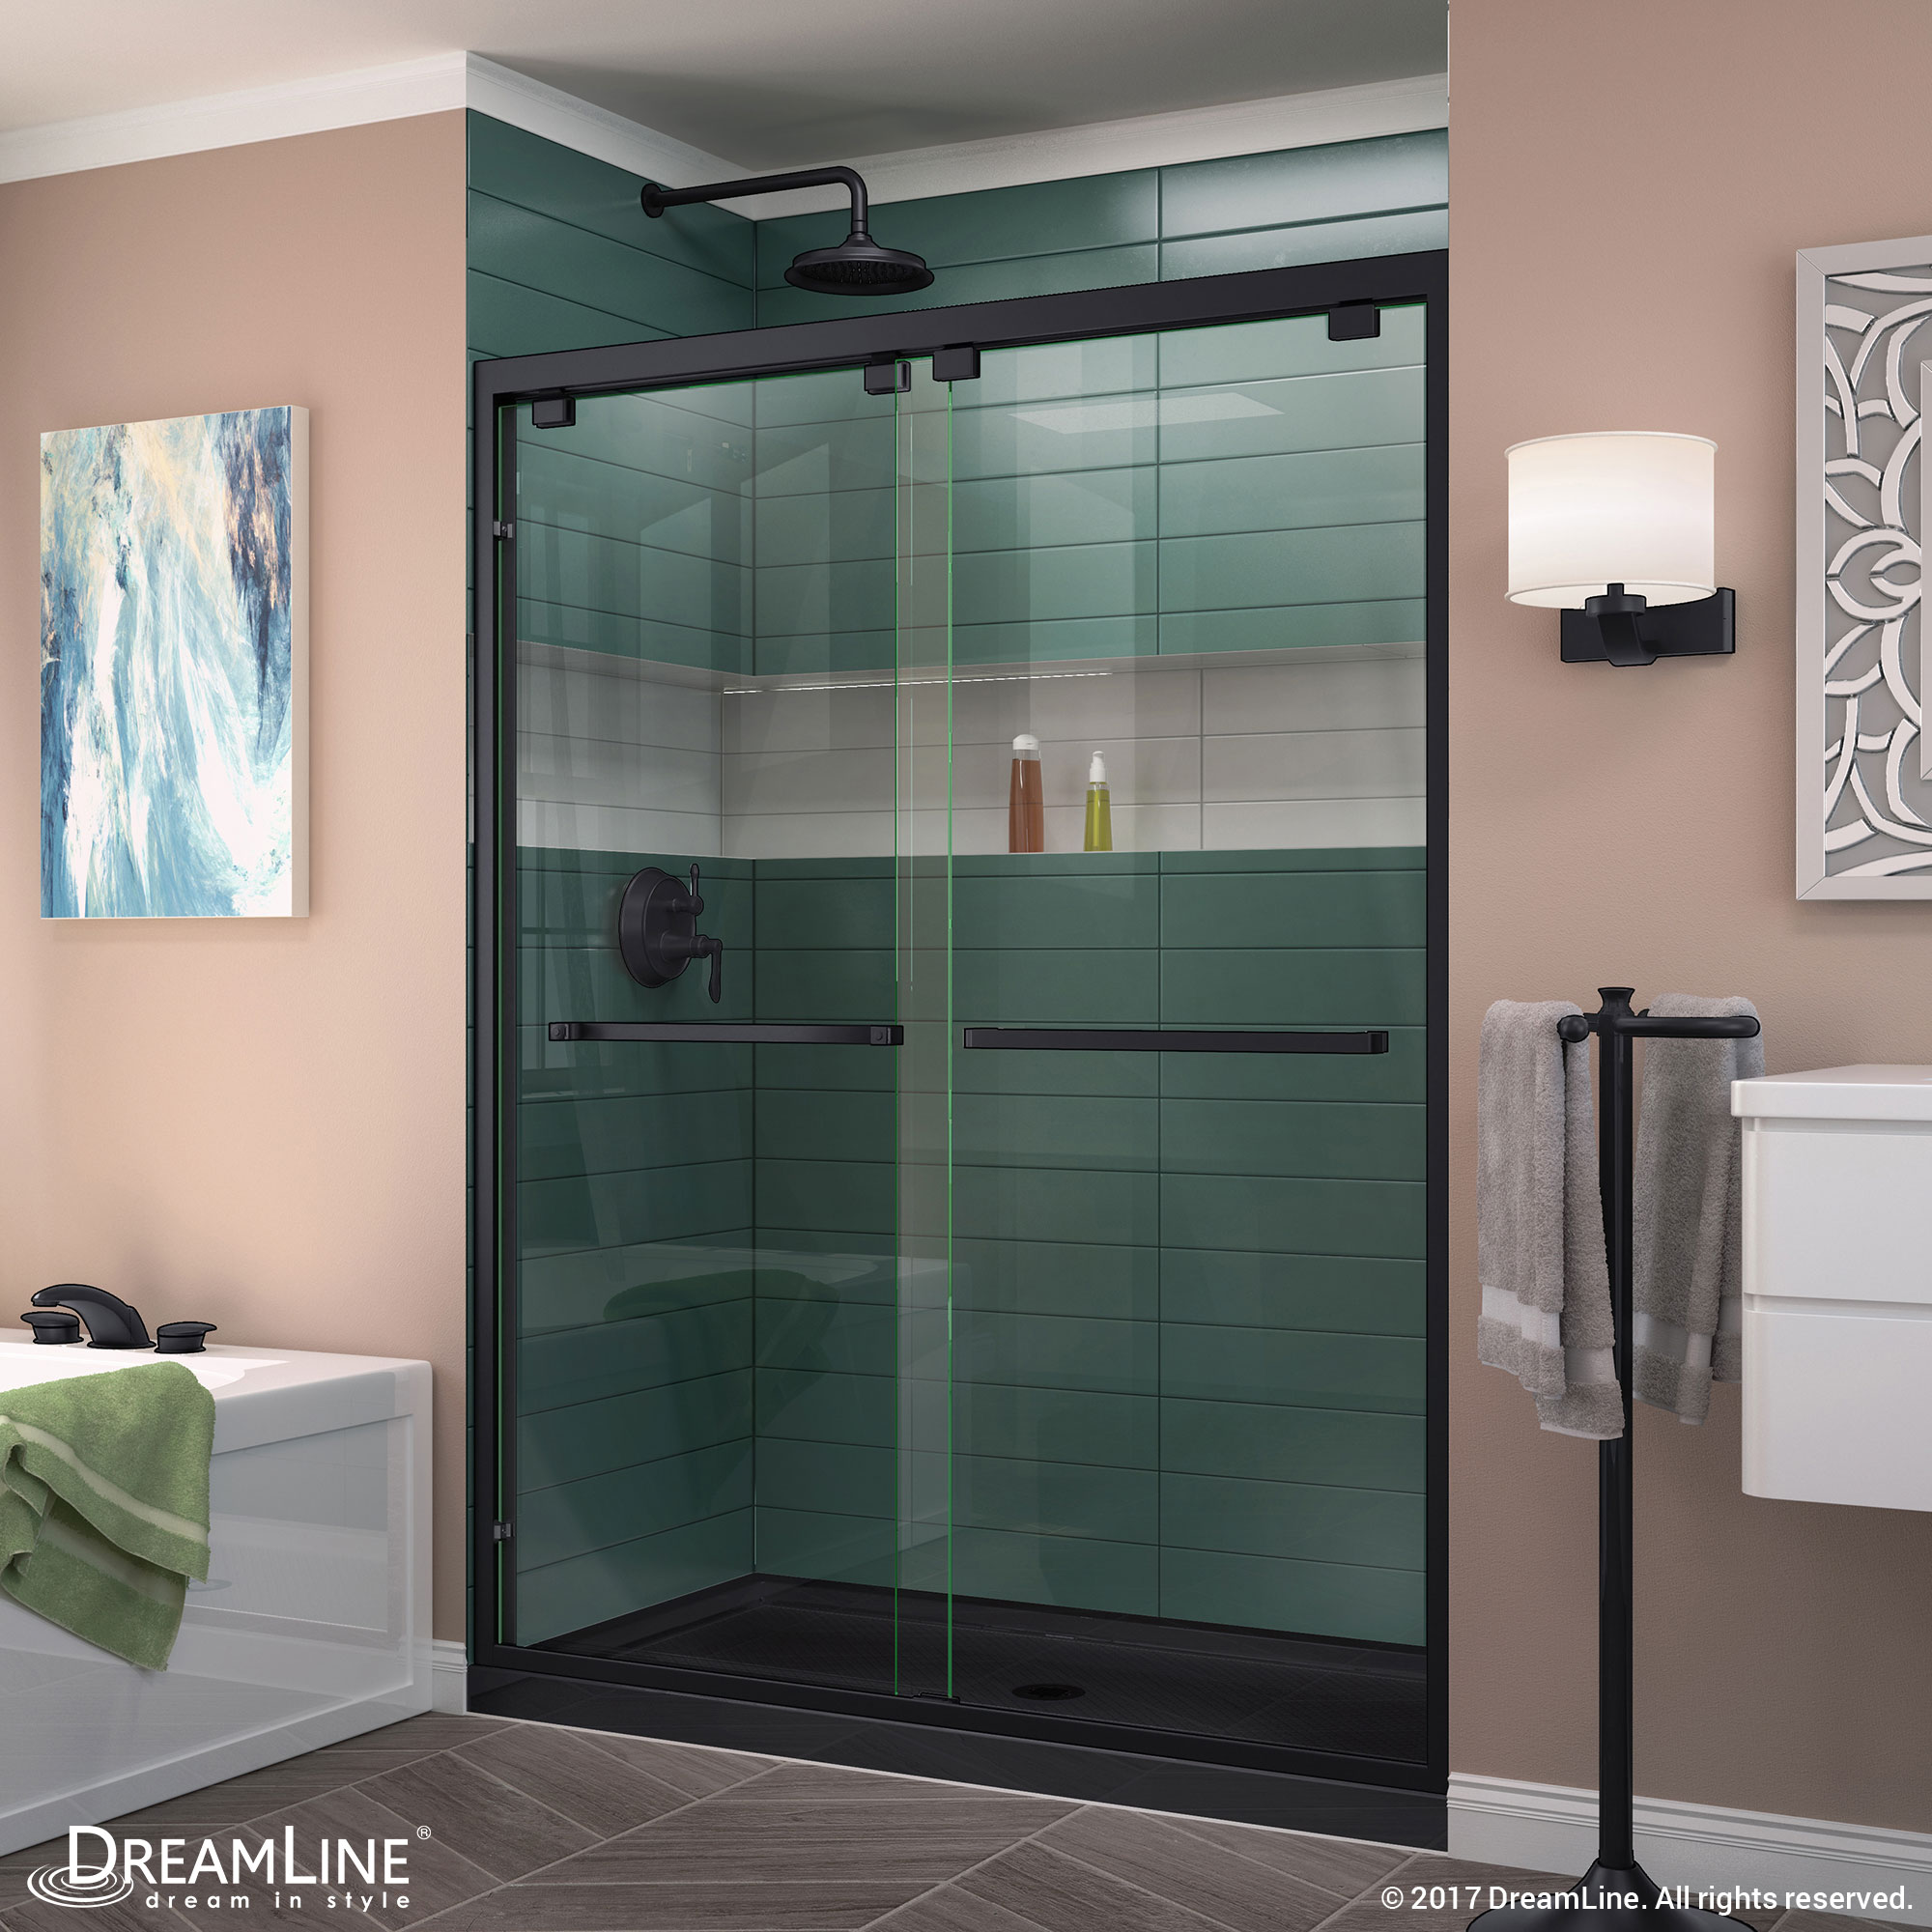 DreamLine Encore 32 in. D x 60 in. W x 78 3/4 in. H Bypass Shower Door in Brushed Nickel and Right Drain White Base Kit